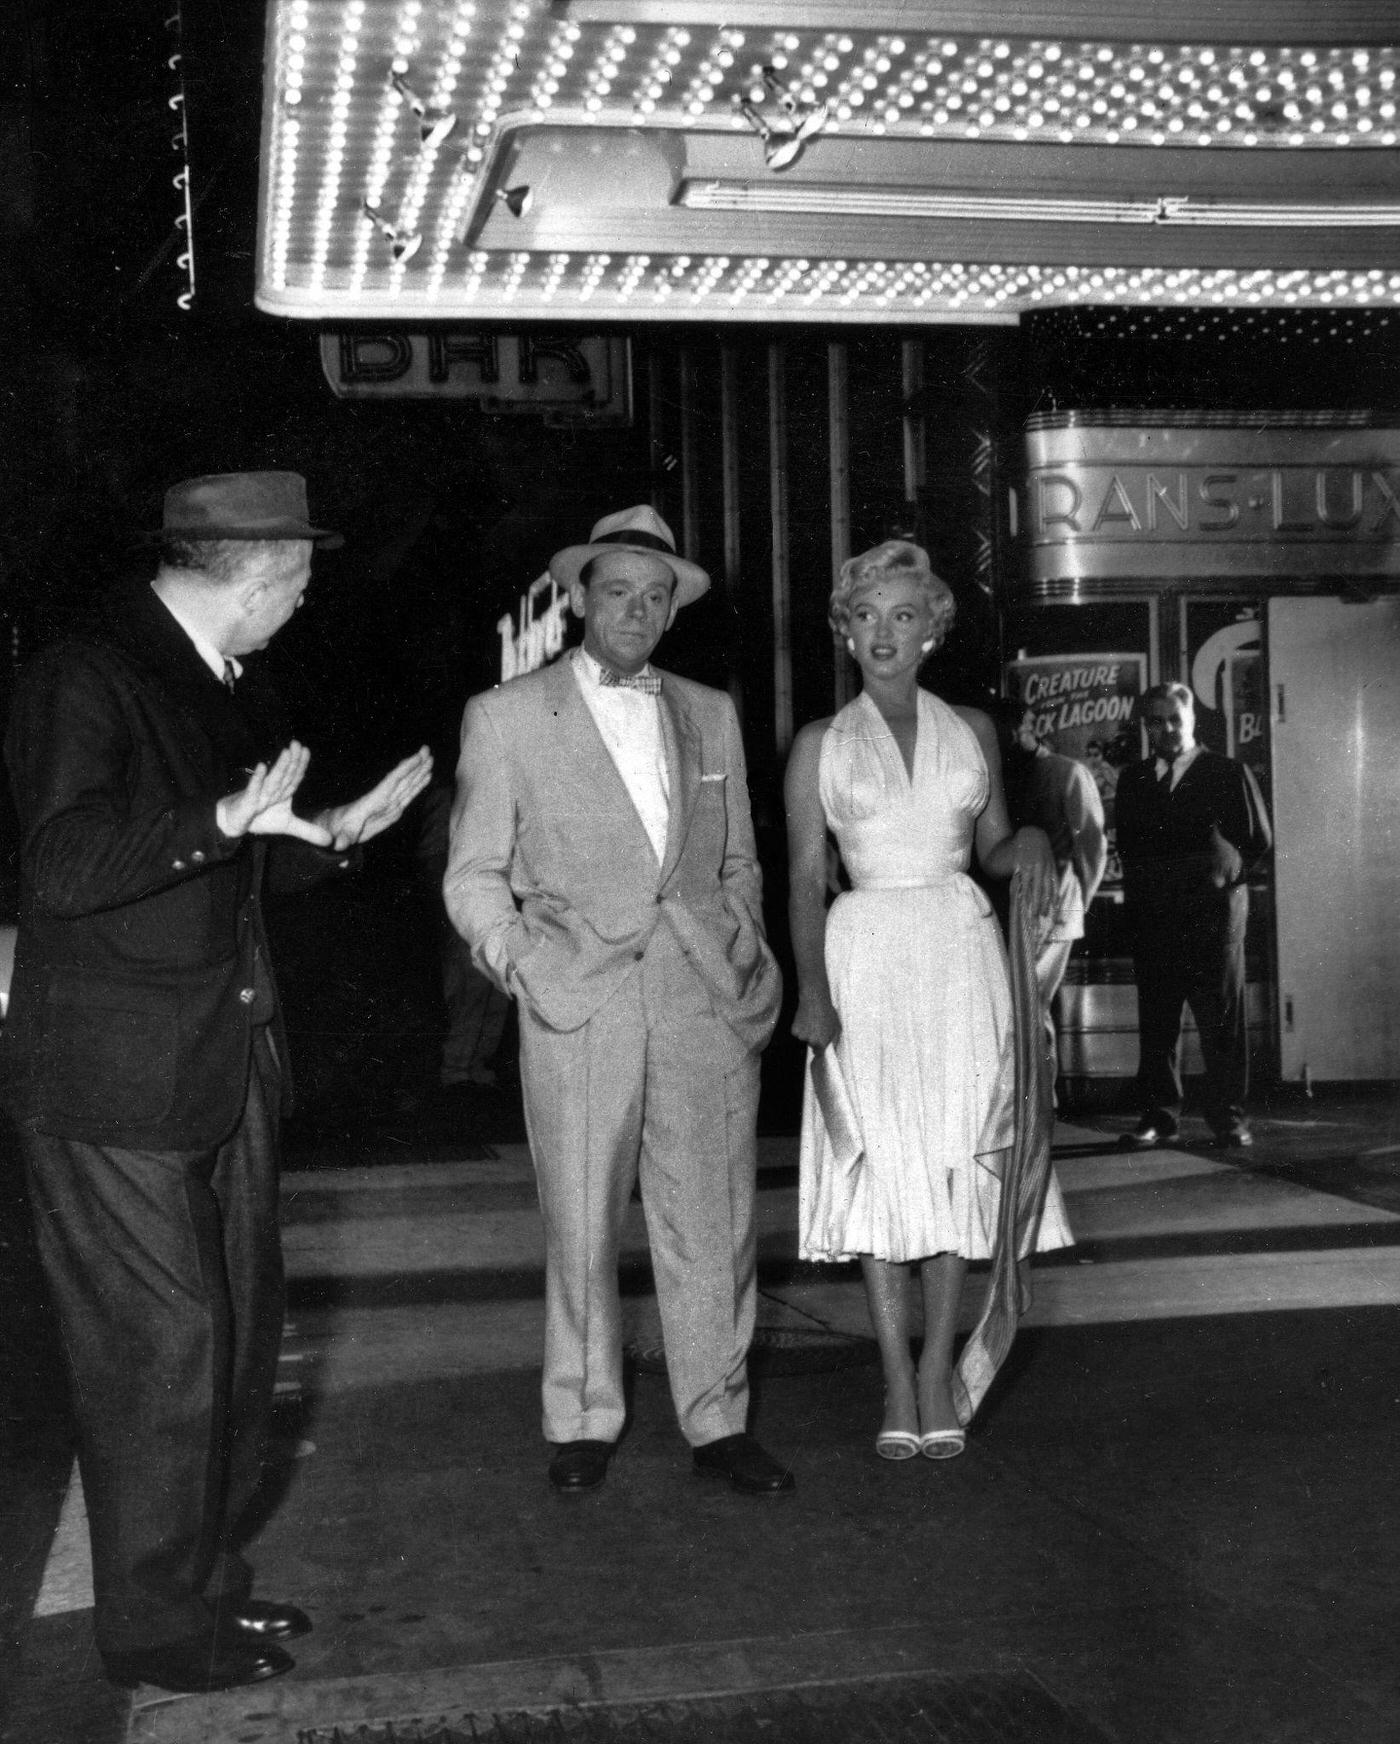 Marilyn Monroe with co-star Tom Ewell and director Billy Wilder on the corner of 51st Street and Lexington Avenue while filming the famous skirt-blowing scene for "The Seven Year Itch" in September, 1954